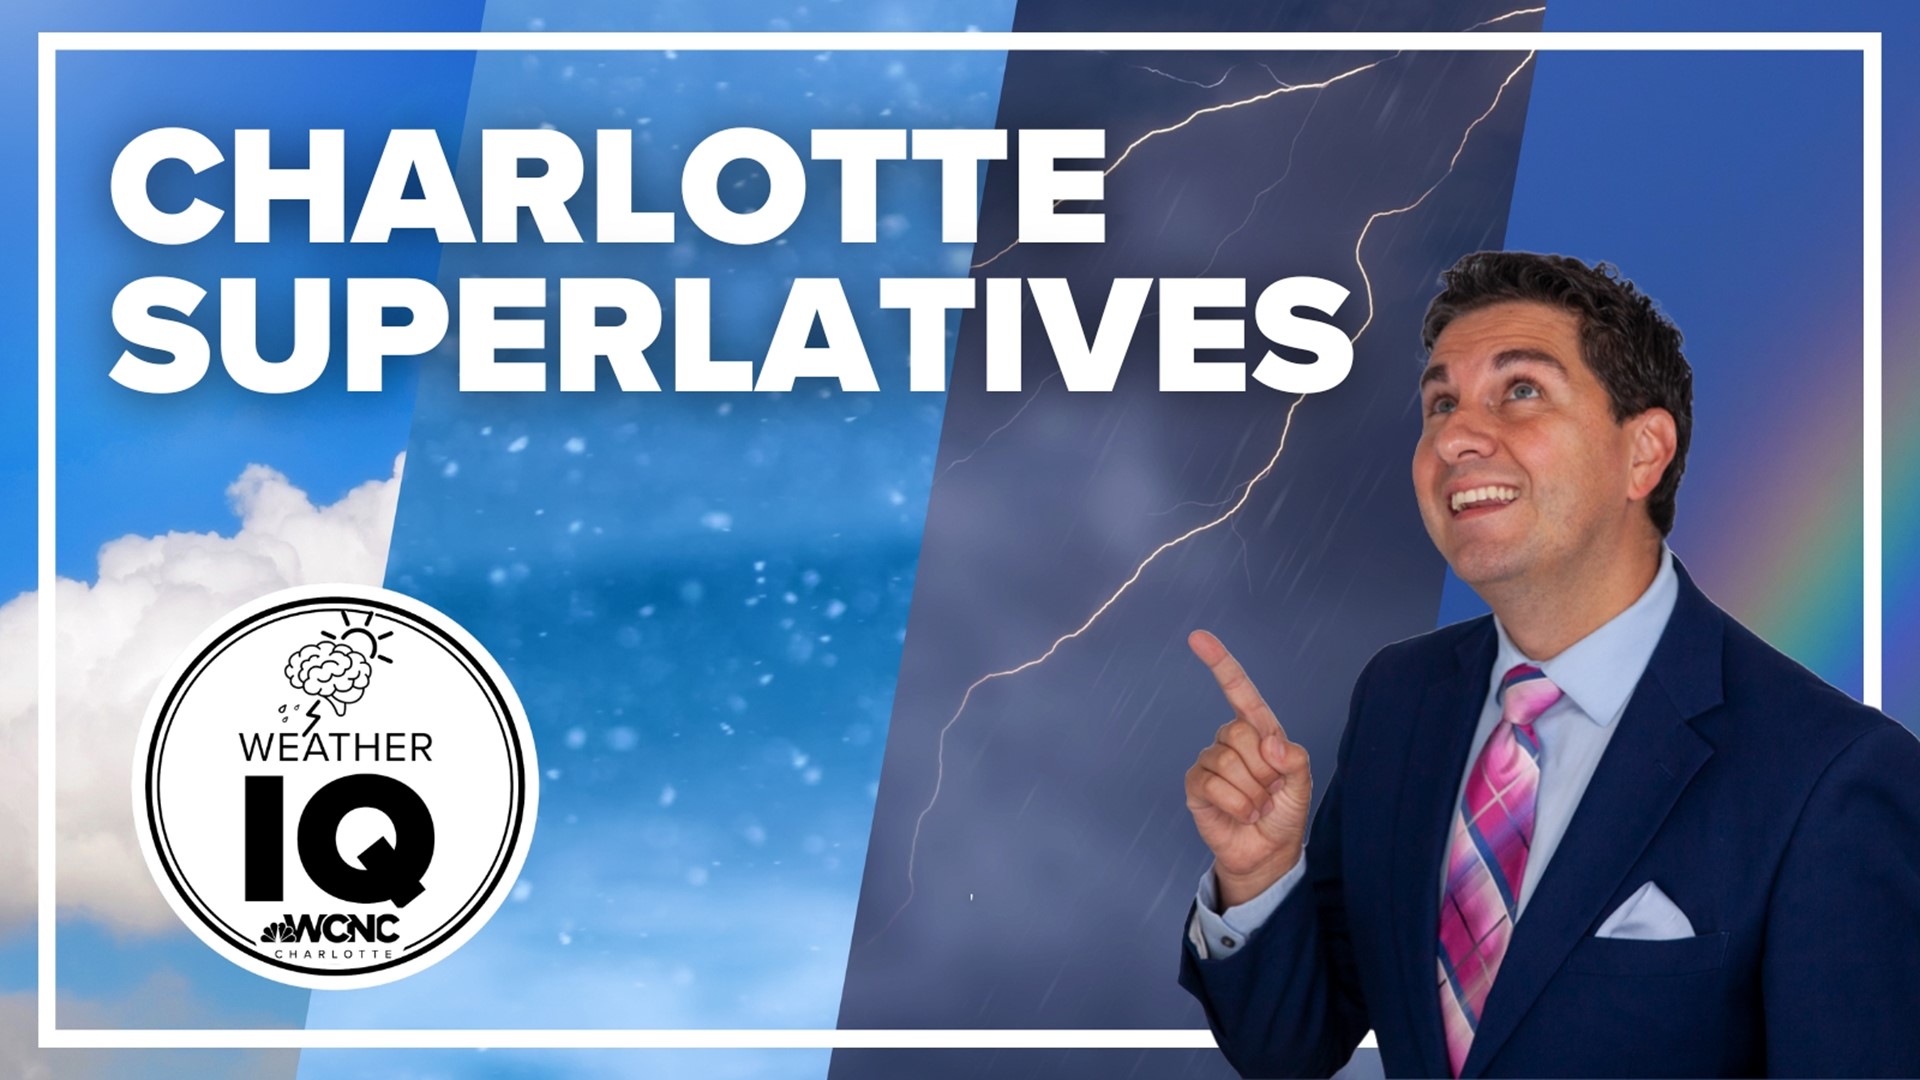 Chris breaks down the specifics on which months are known for specific weather extremes.